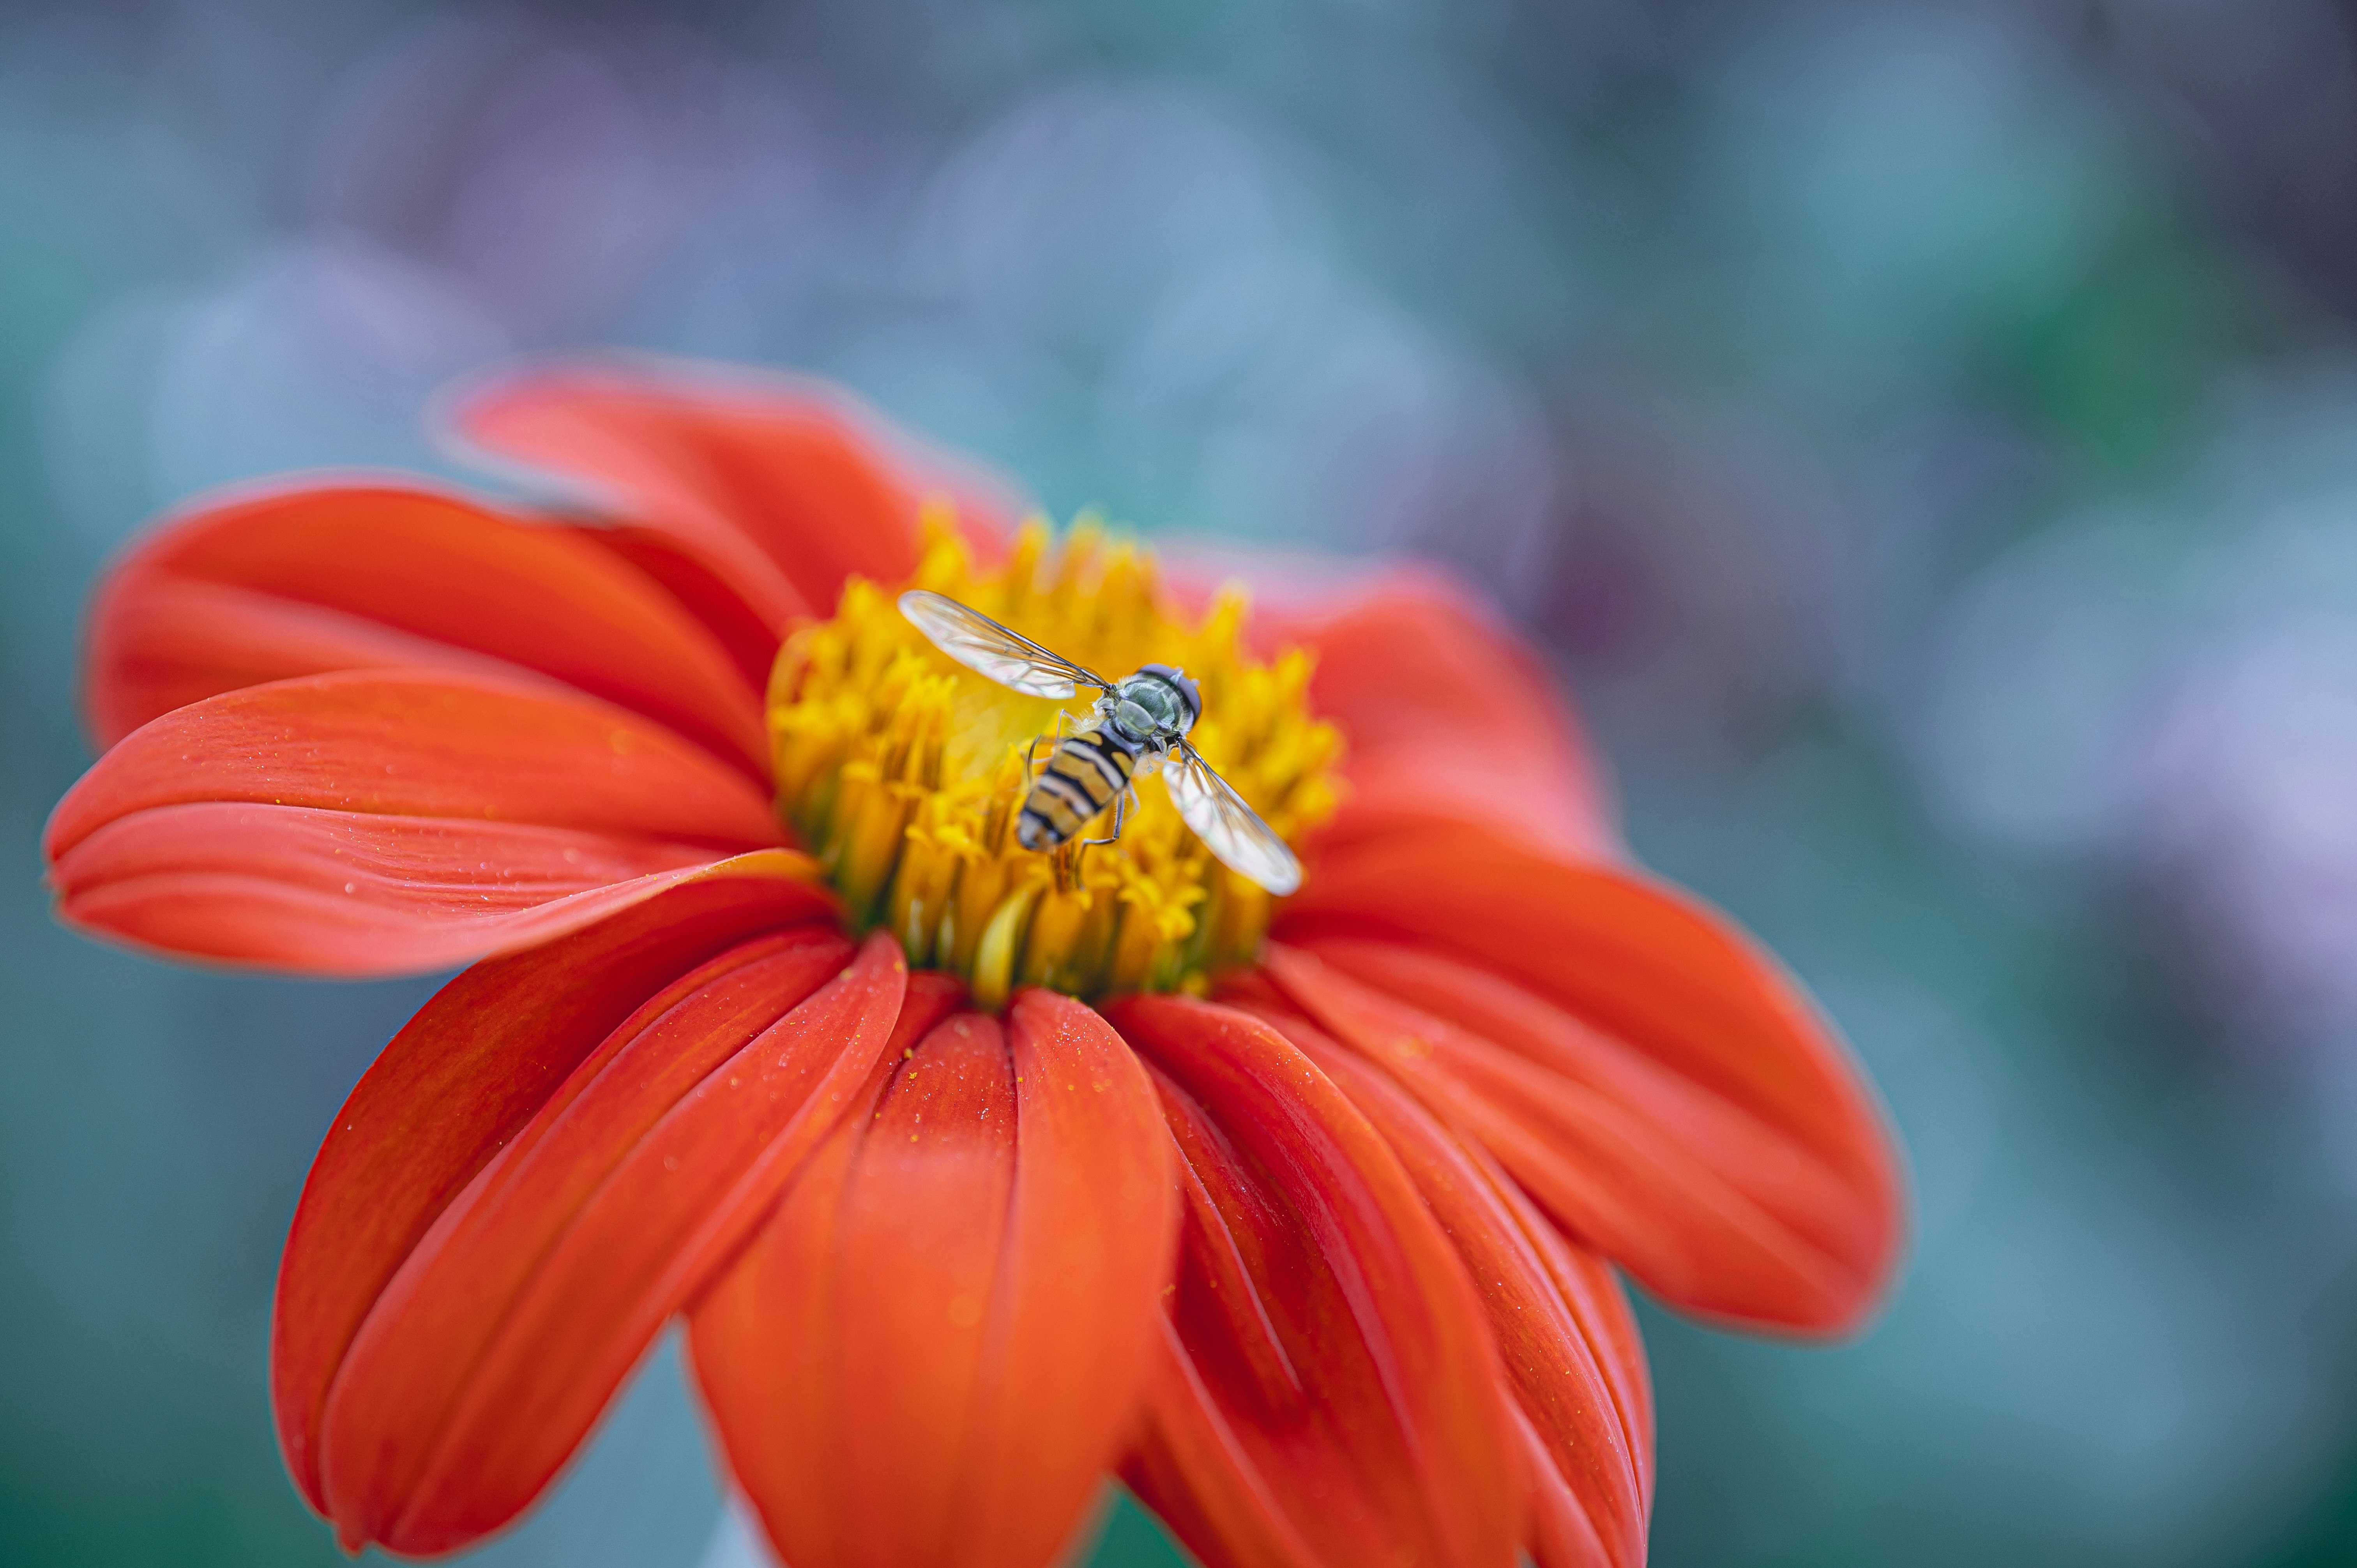 honeybee perched on orange flower in close up photography during daytime